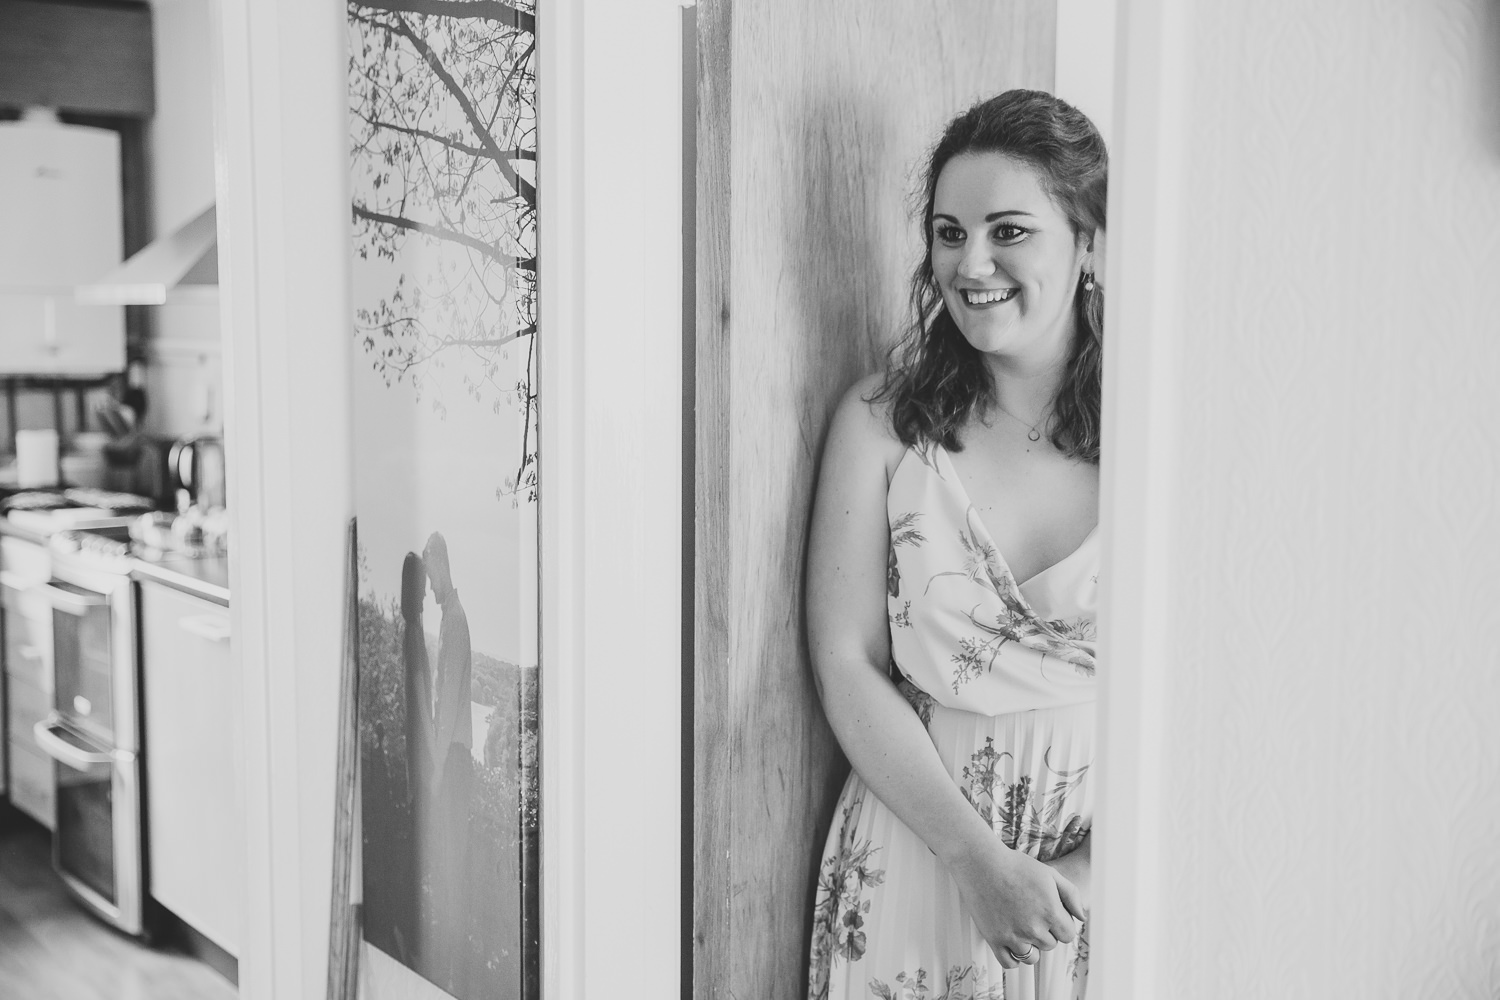 Black and white photo of girl standing in a door in a house, smiling